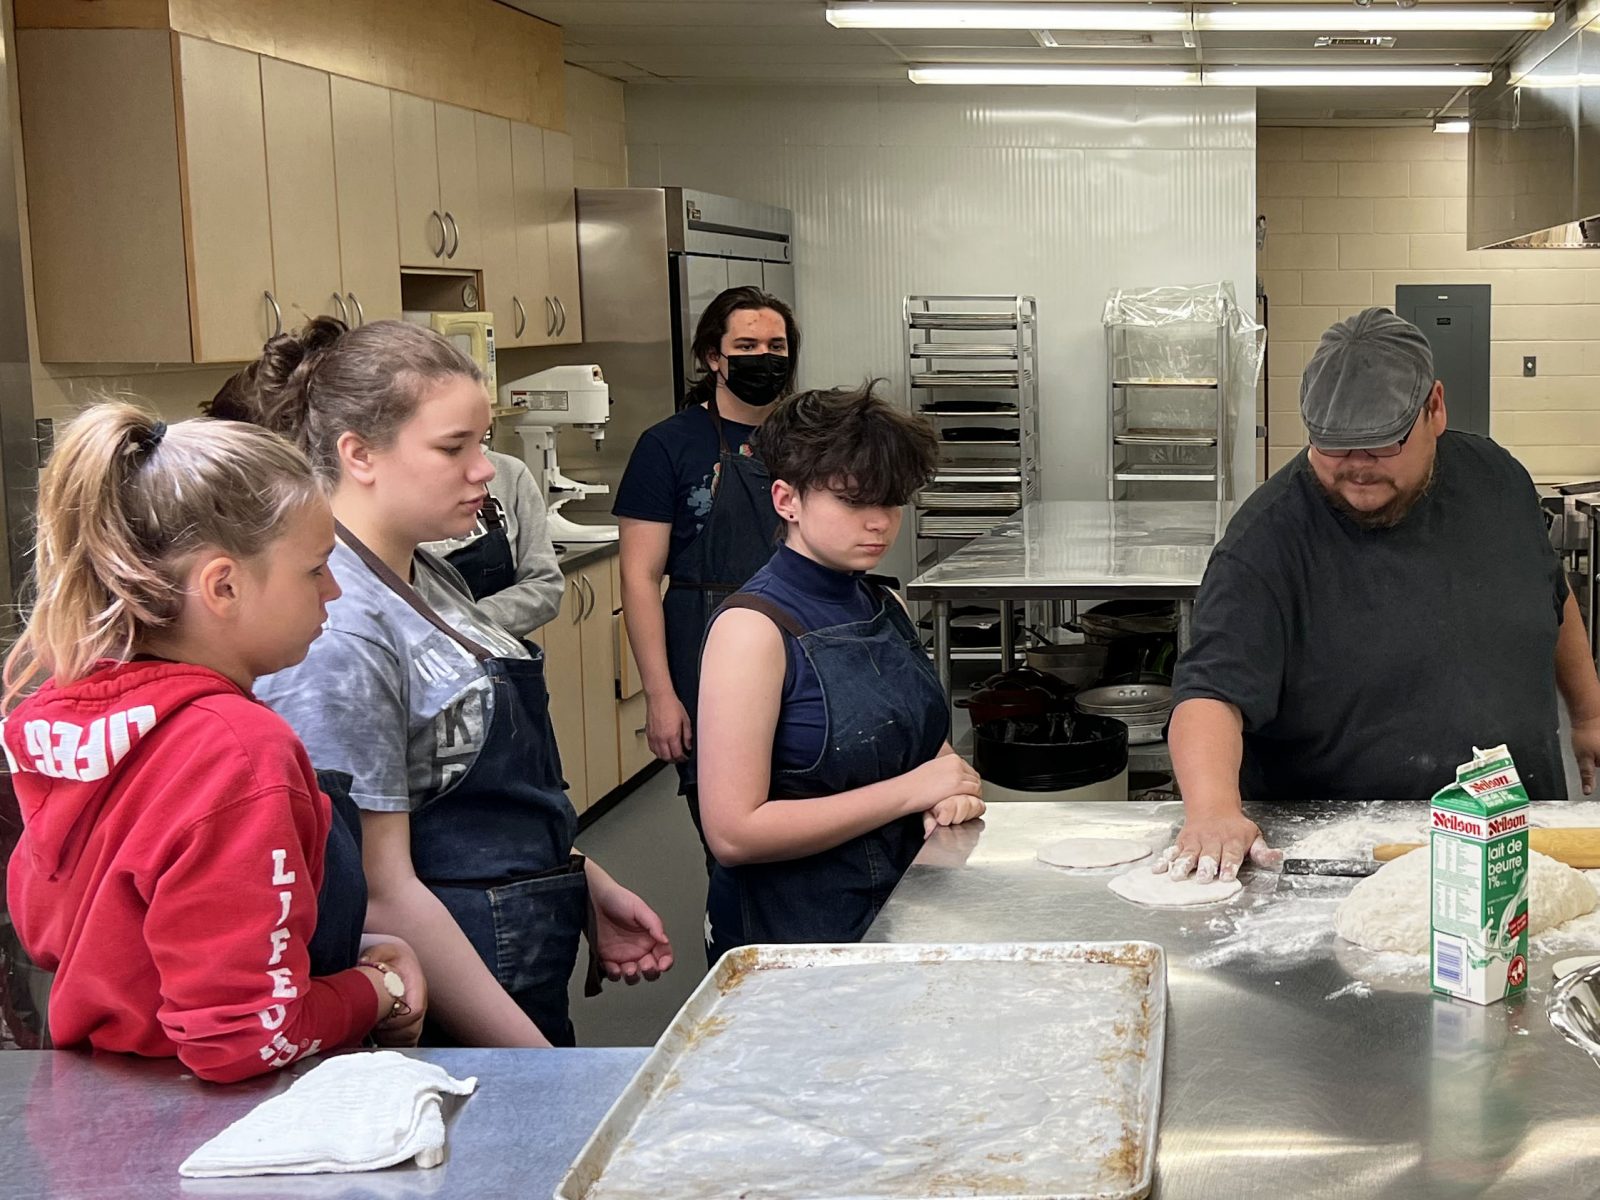 St. Lawrence Secondary School Indigenous Culinary After-School Credit Program Offers Students Cultural Learning 